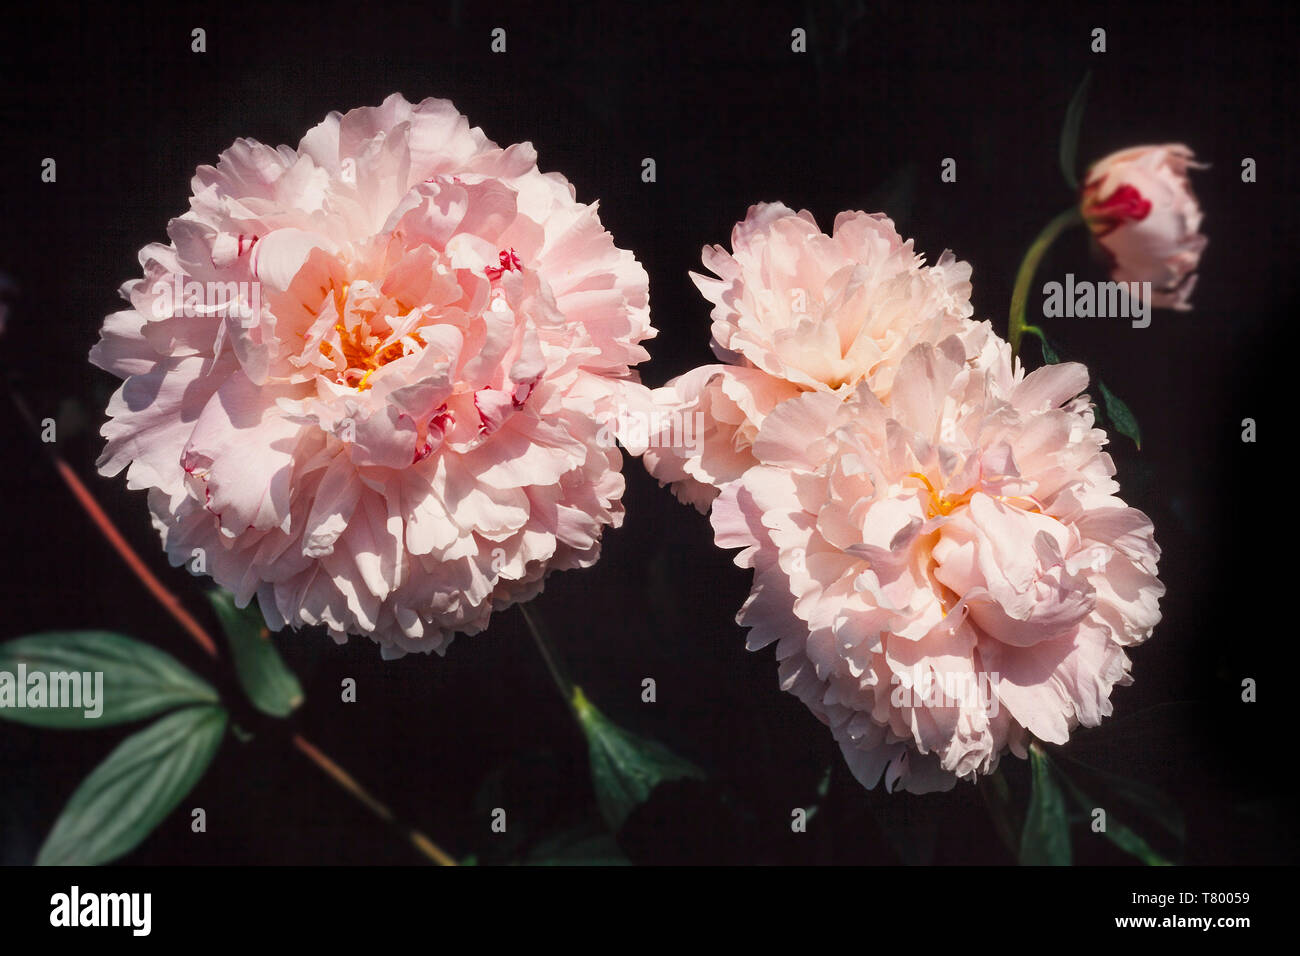 Double Peony Showtime in flower, Stock Photo